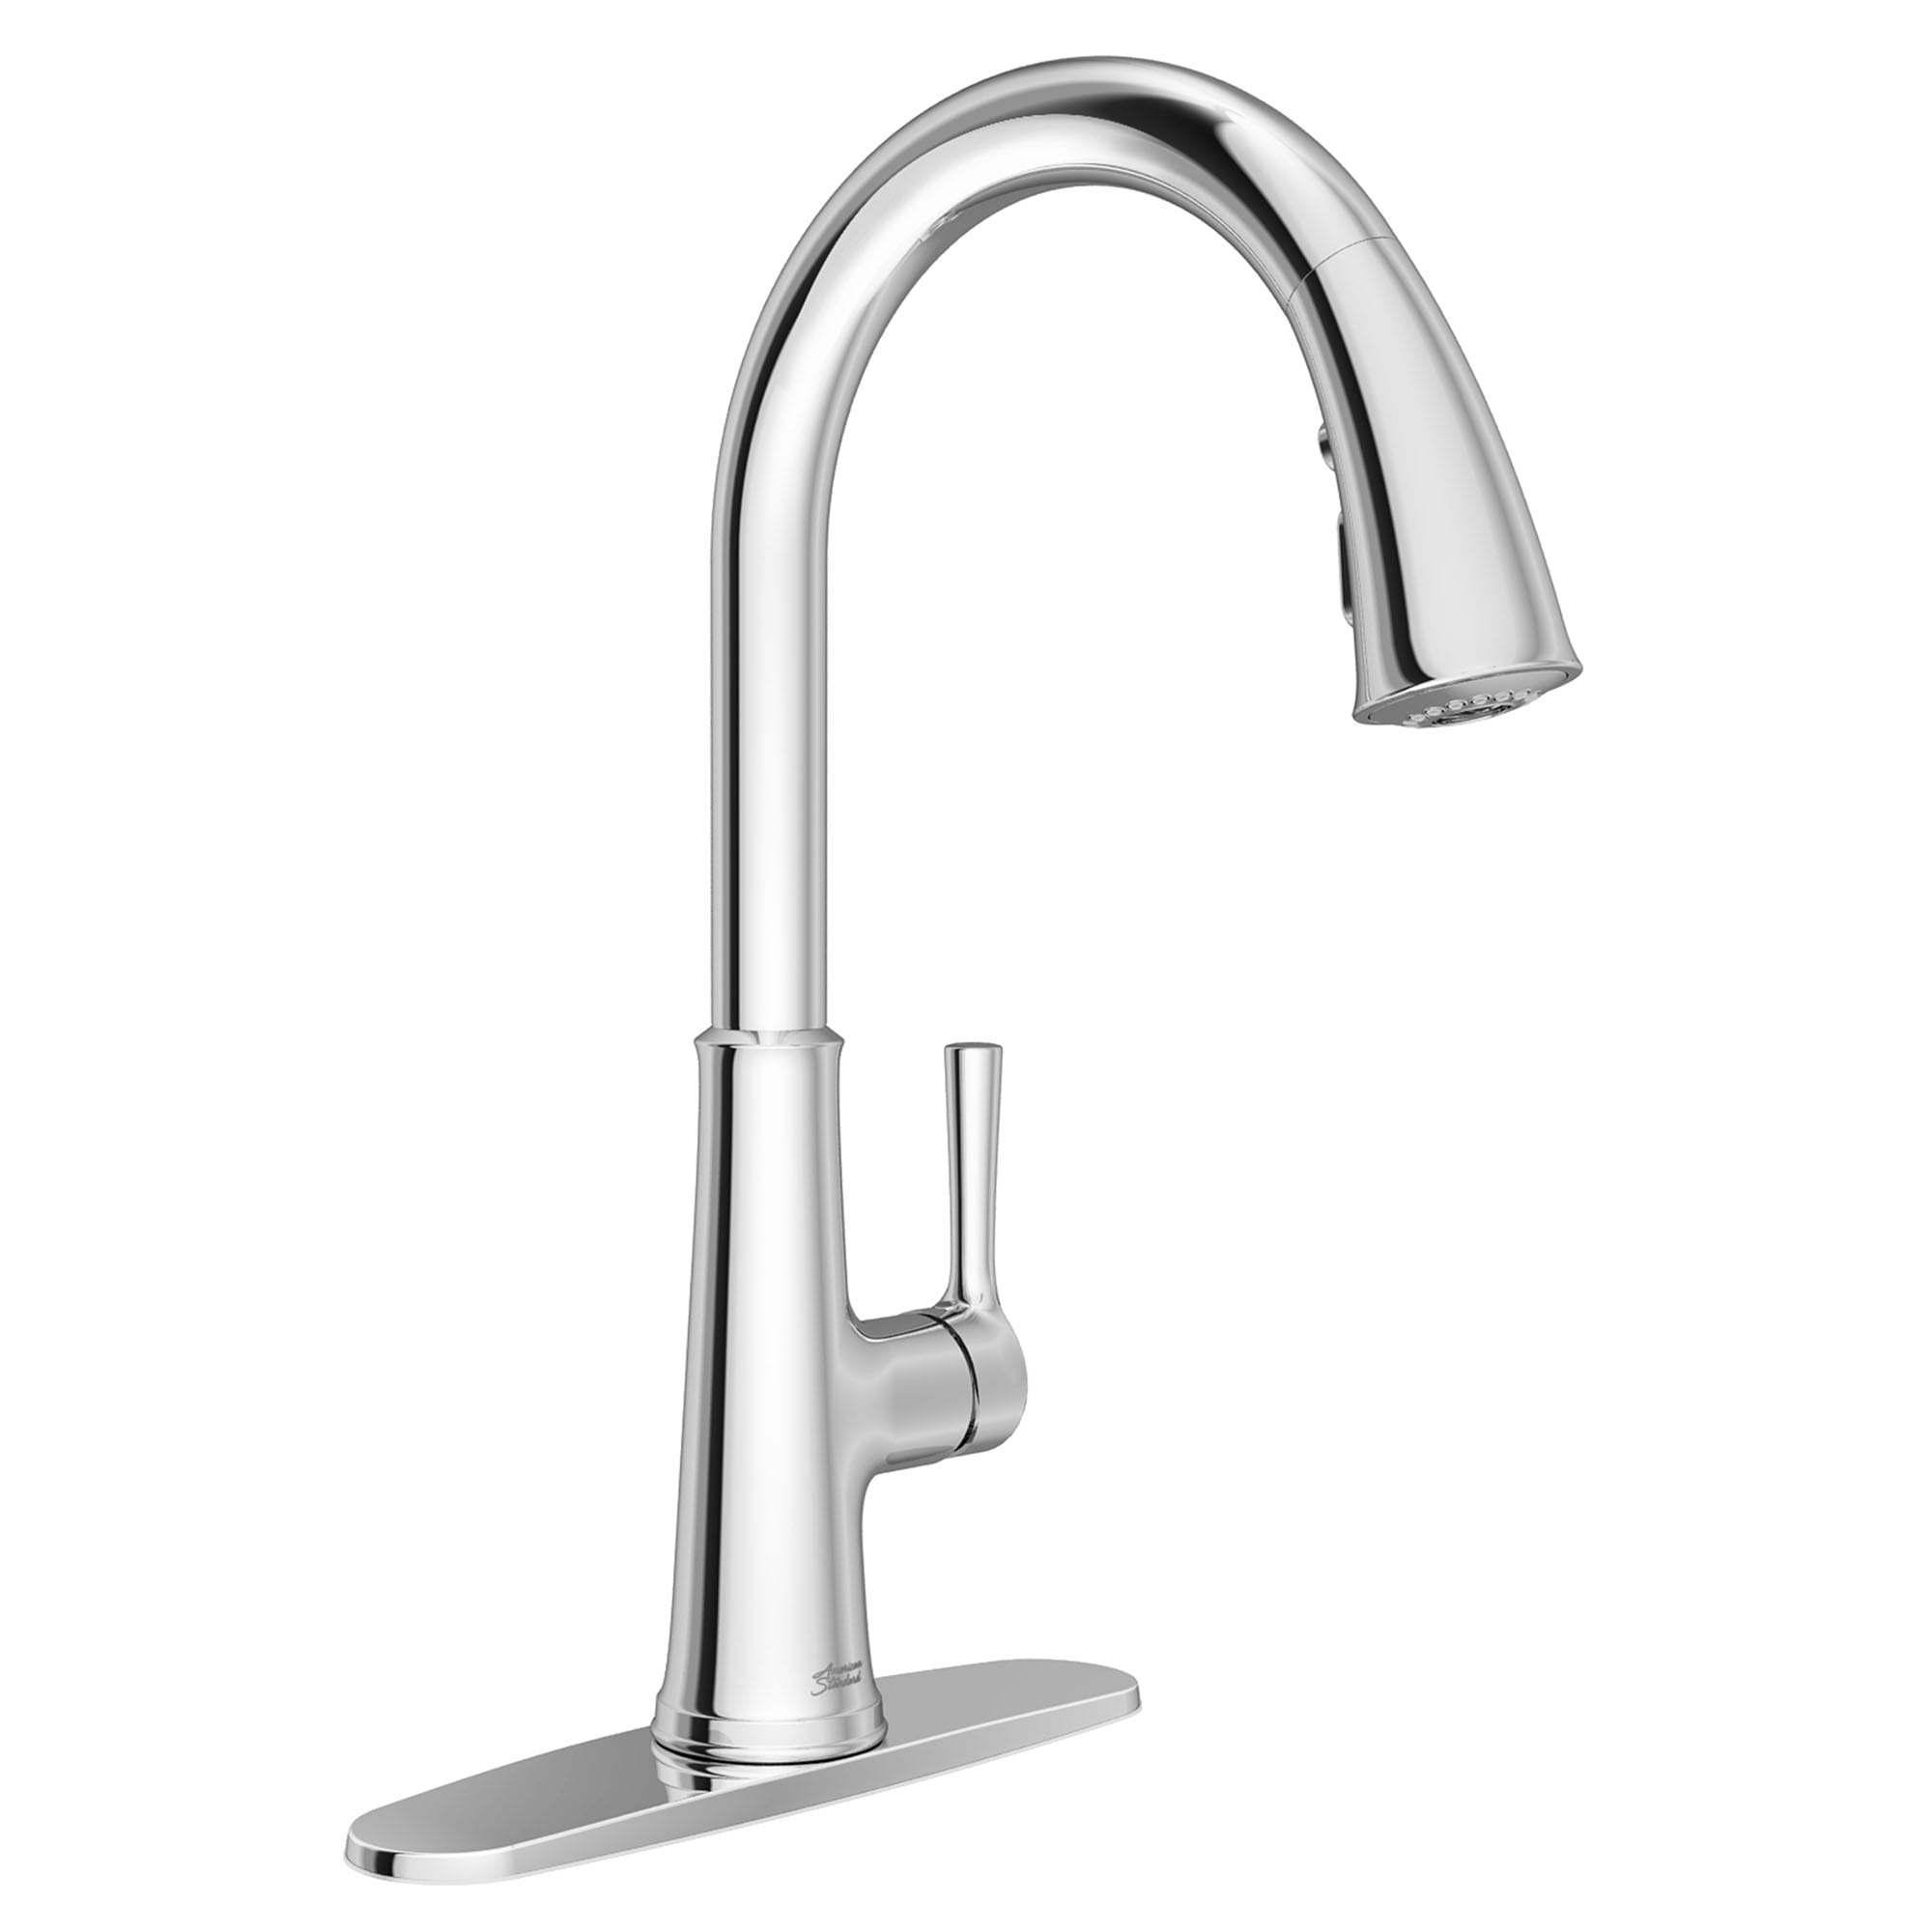 Renate™ Single-Handle Pull-Down Single Spray Kitchen Faucet 1.5 gpm/5.7 Lpm